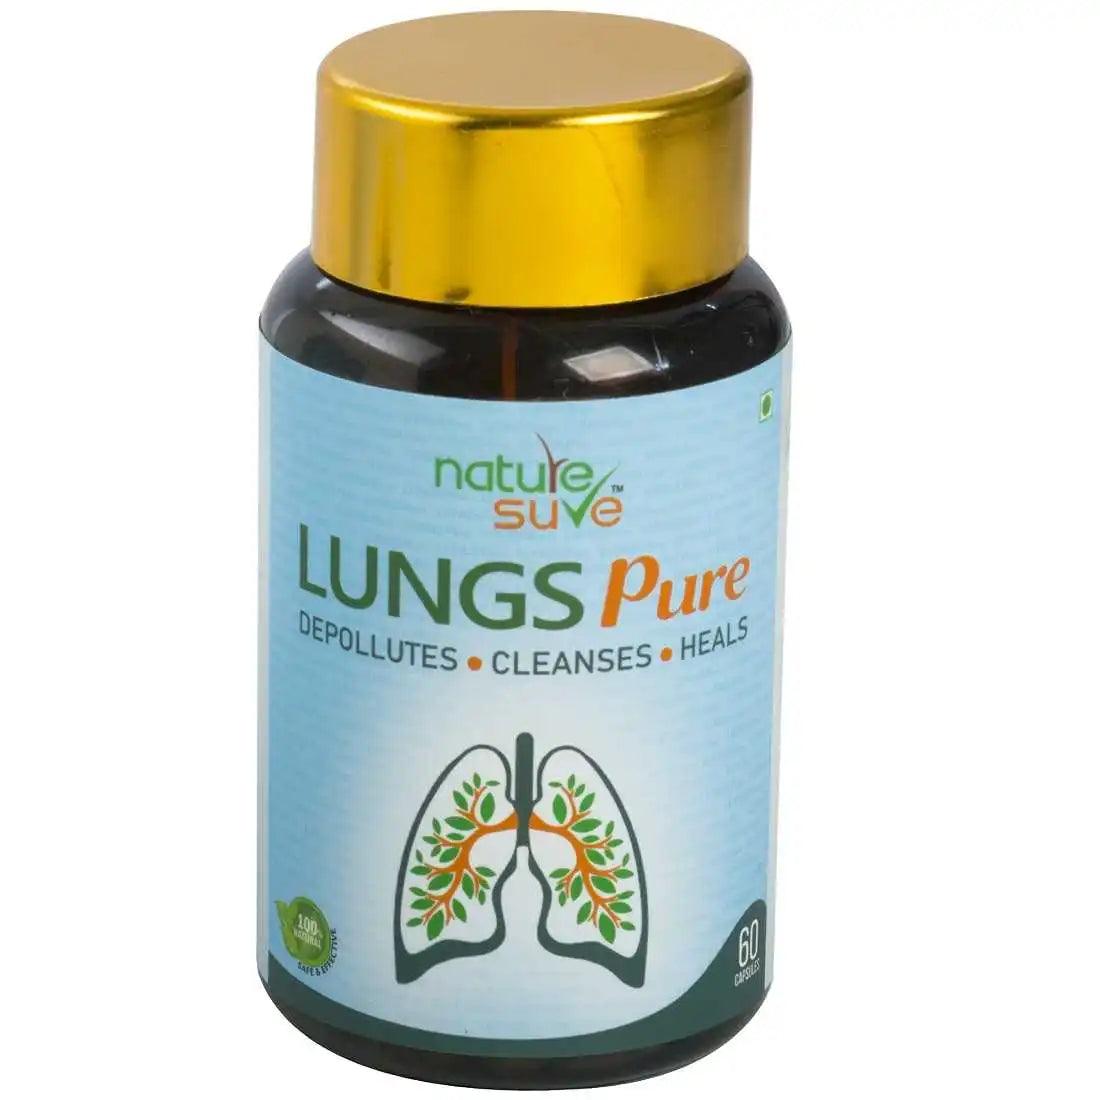 Nature Sure Lungs Pure Comes In A Sturdy Amber Bottle - everteen-neud.com